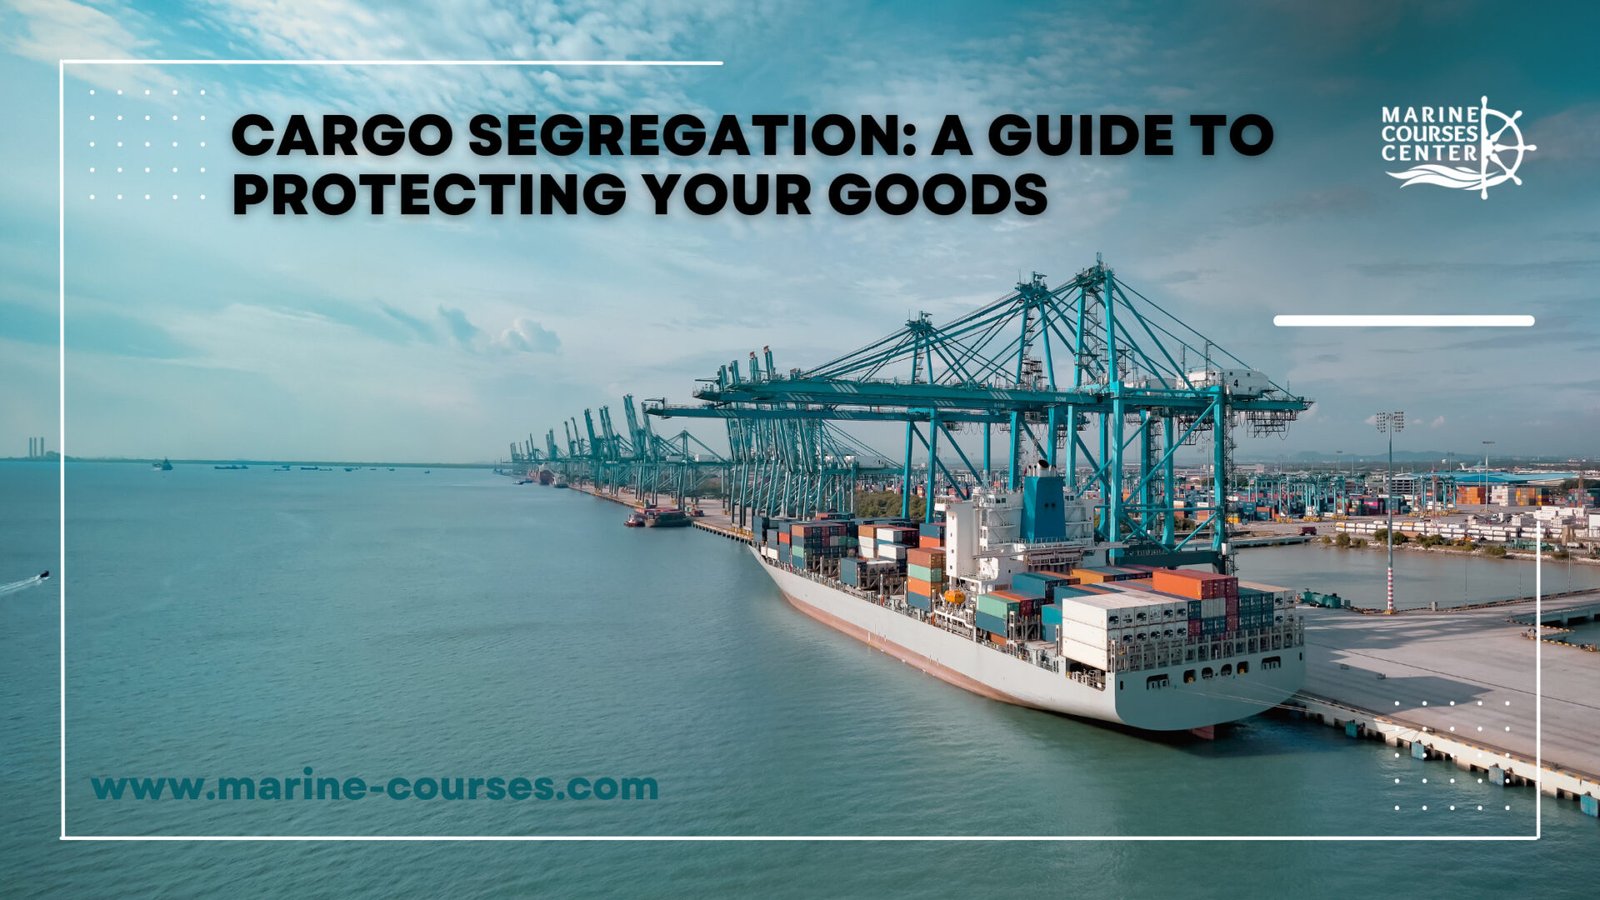 Cargo Segregation: A Guide to Protecting Your Goods